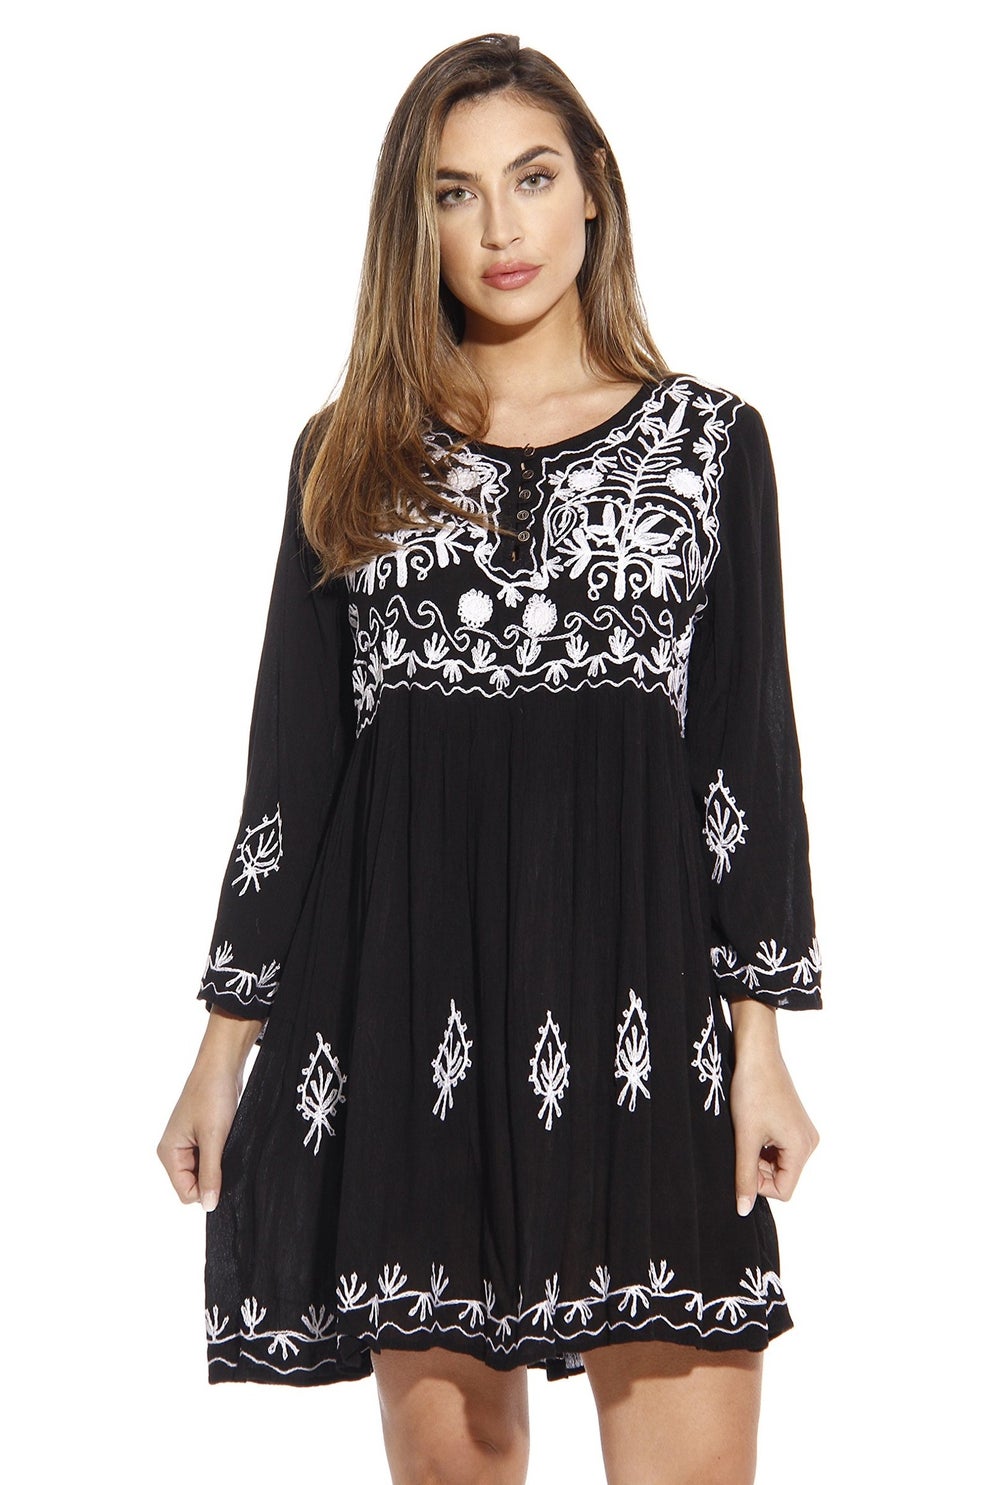 27 Little Black Dresses From Walmart You Need In Your Life